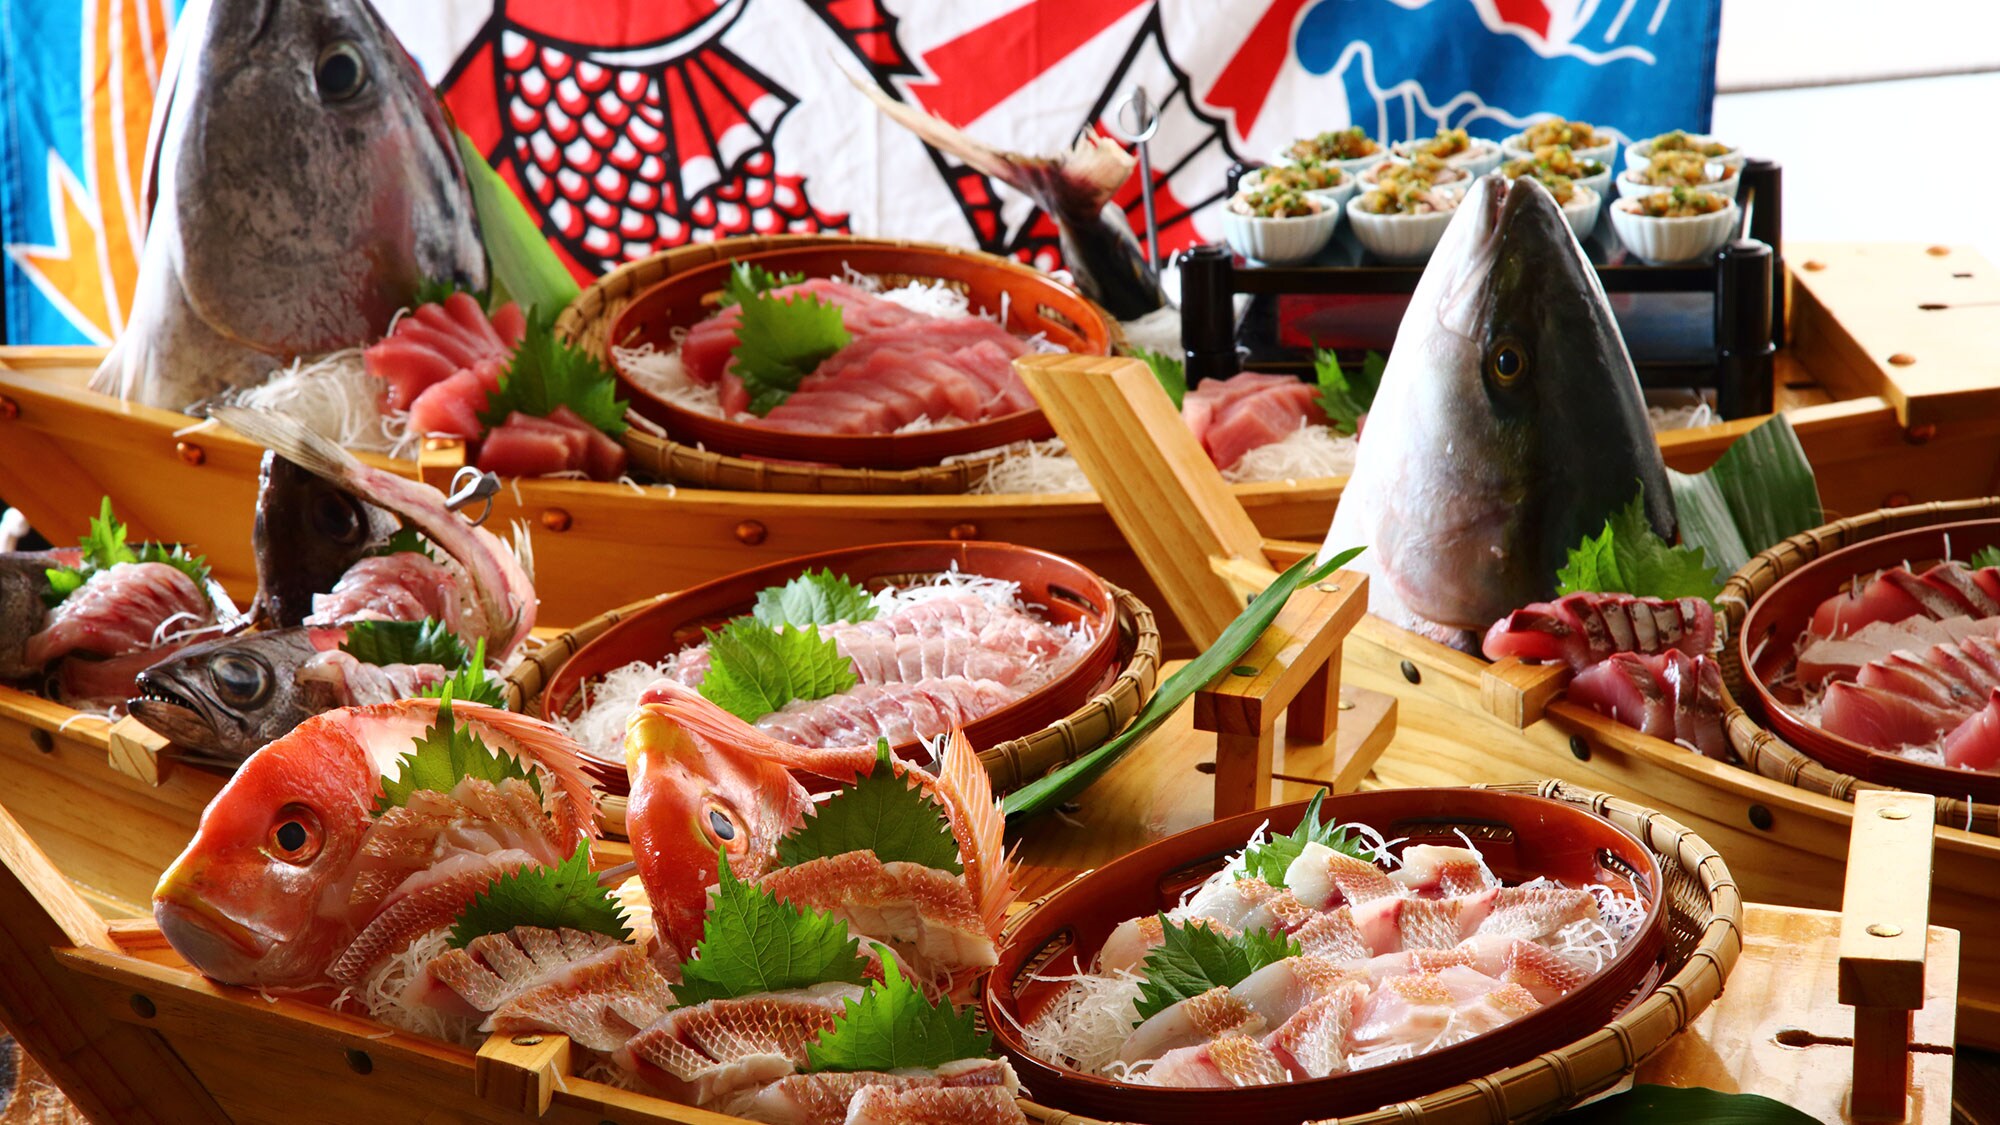 ■ A lot of fresh seafood